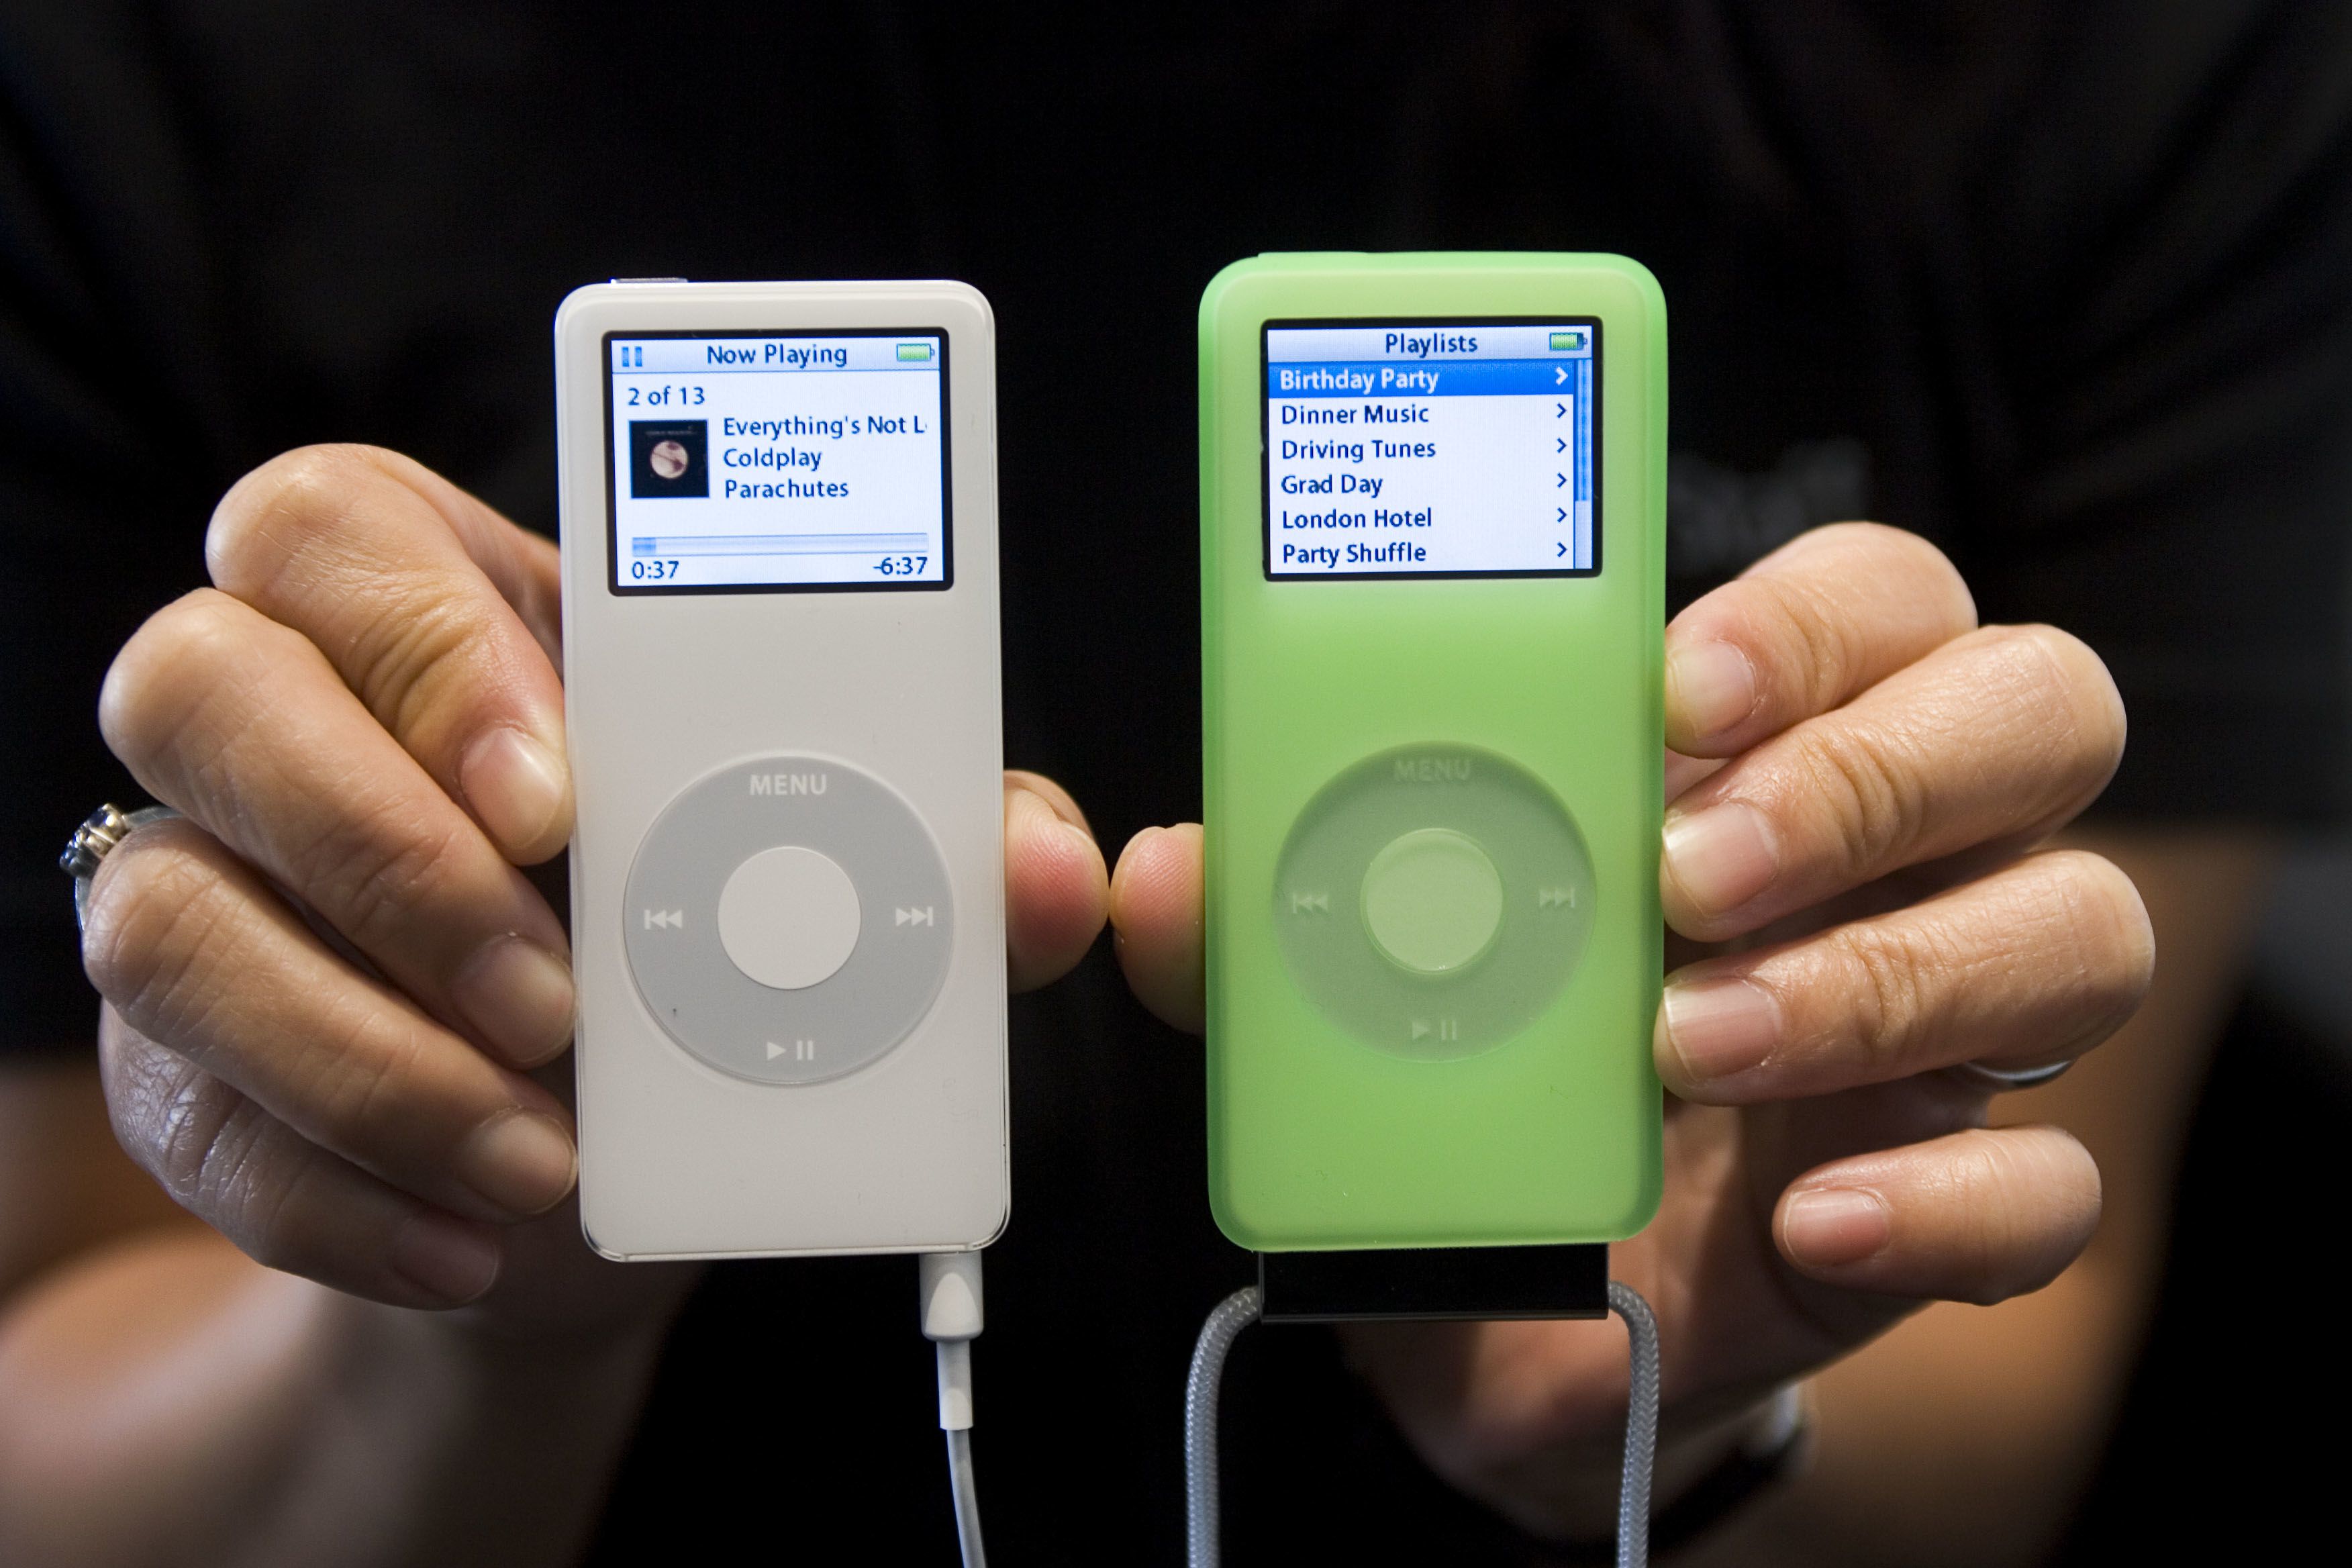 Download Songs From Ipod Nano To Mac